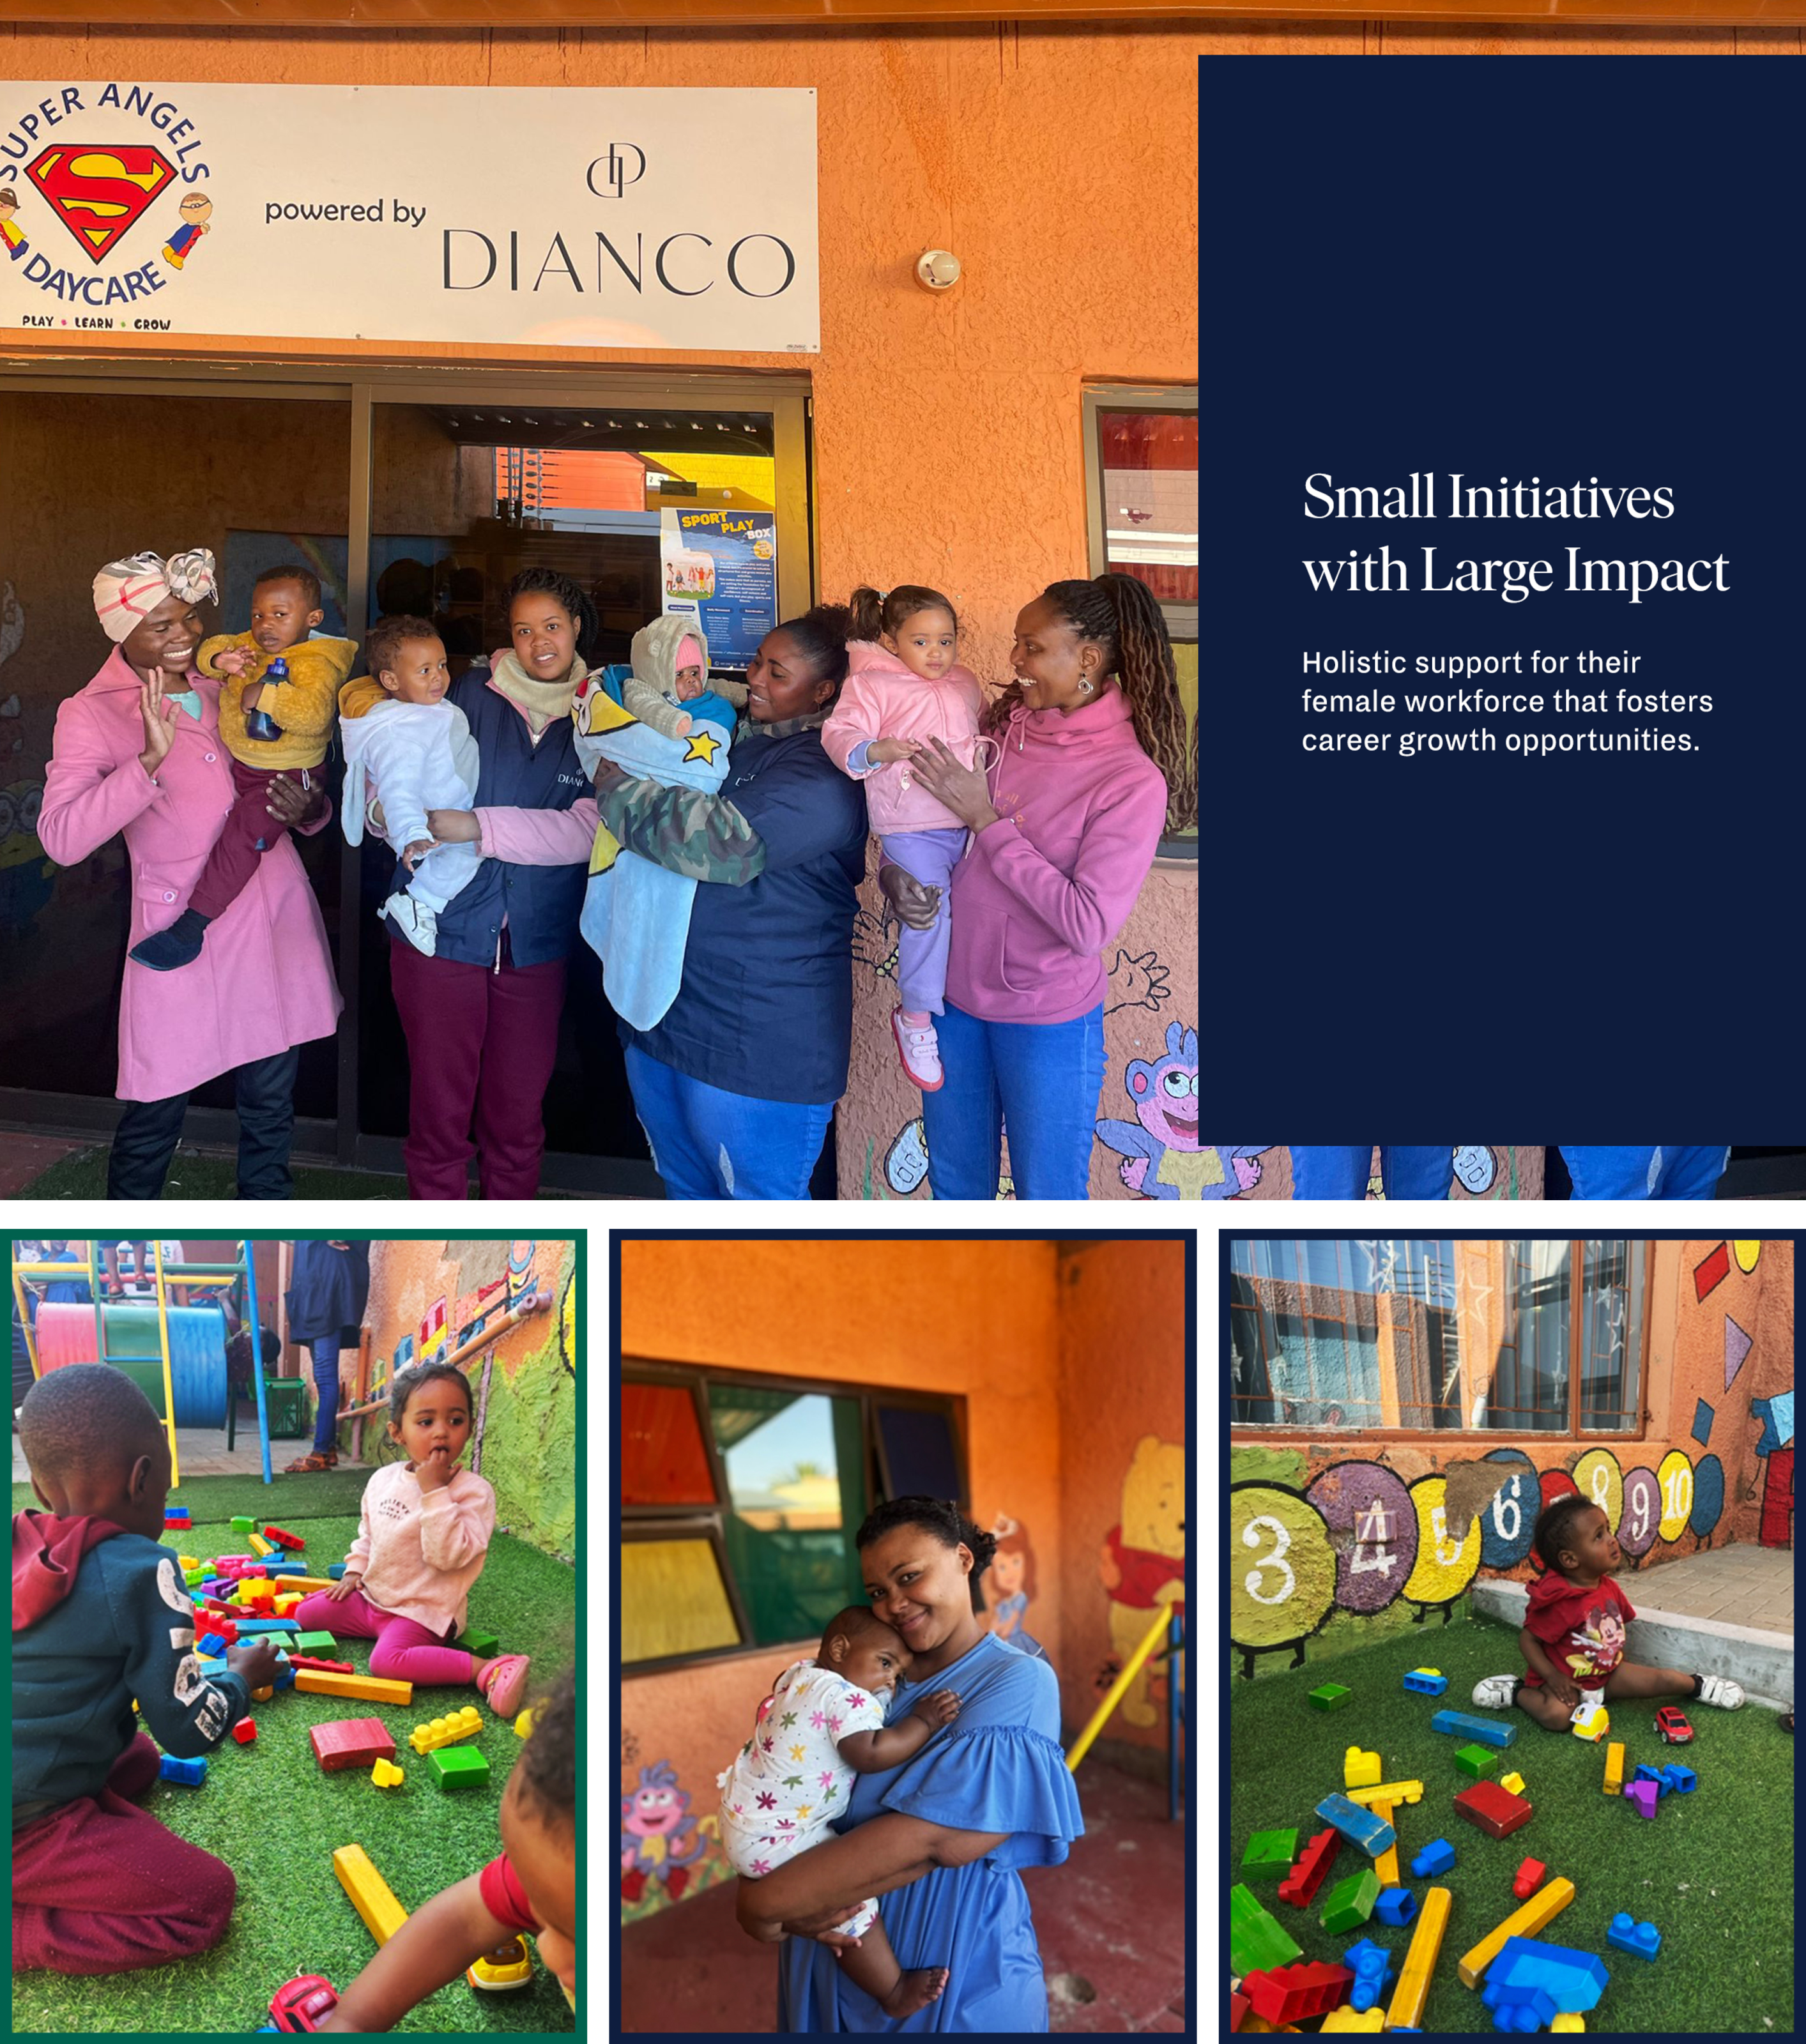 Daycare Initiative for Female Workers At DIANCO 